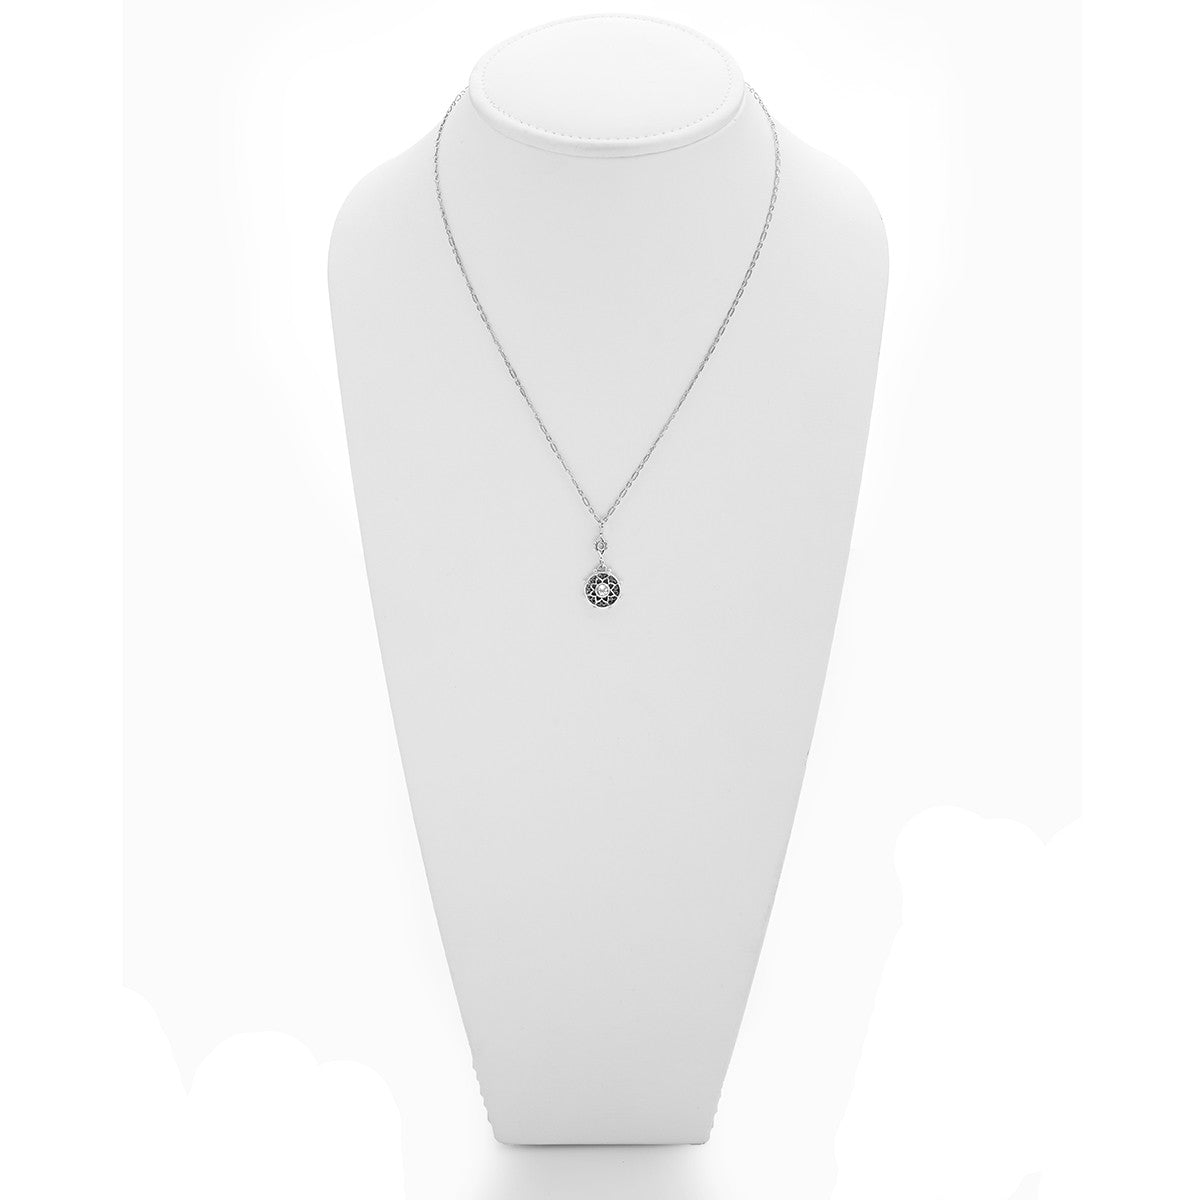 Dharmachakra Sterling Silver White Topaz Serenity Necklace - Cynthia Gale New York Jewelry